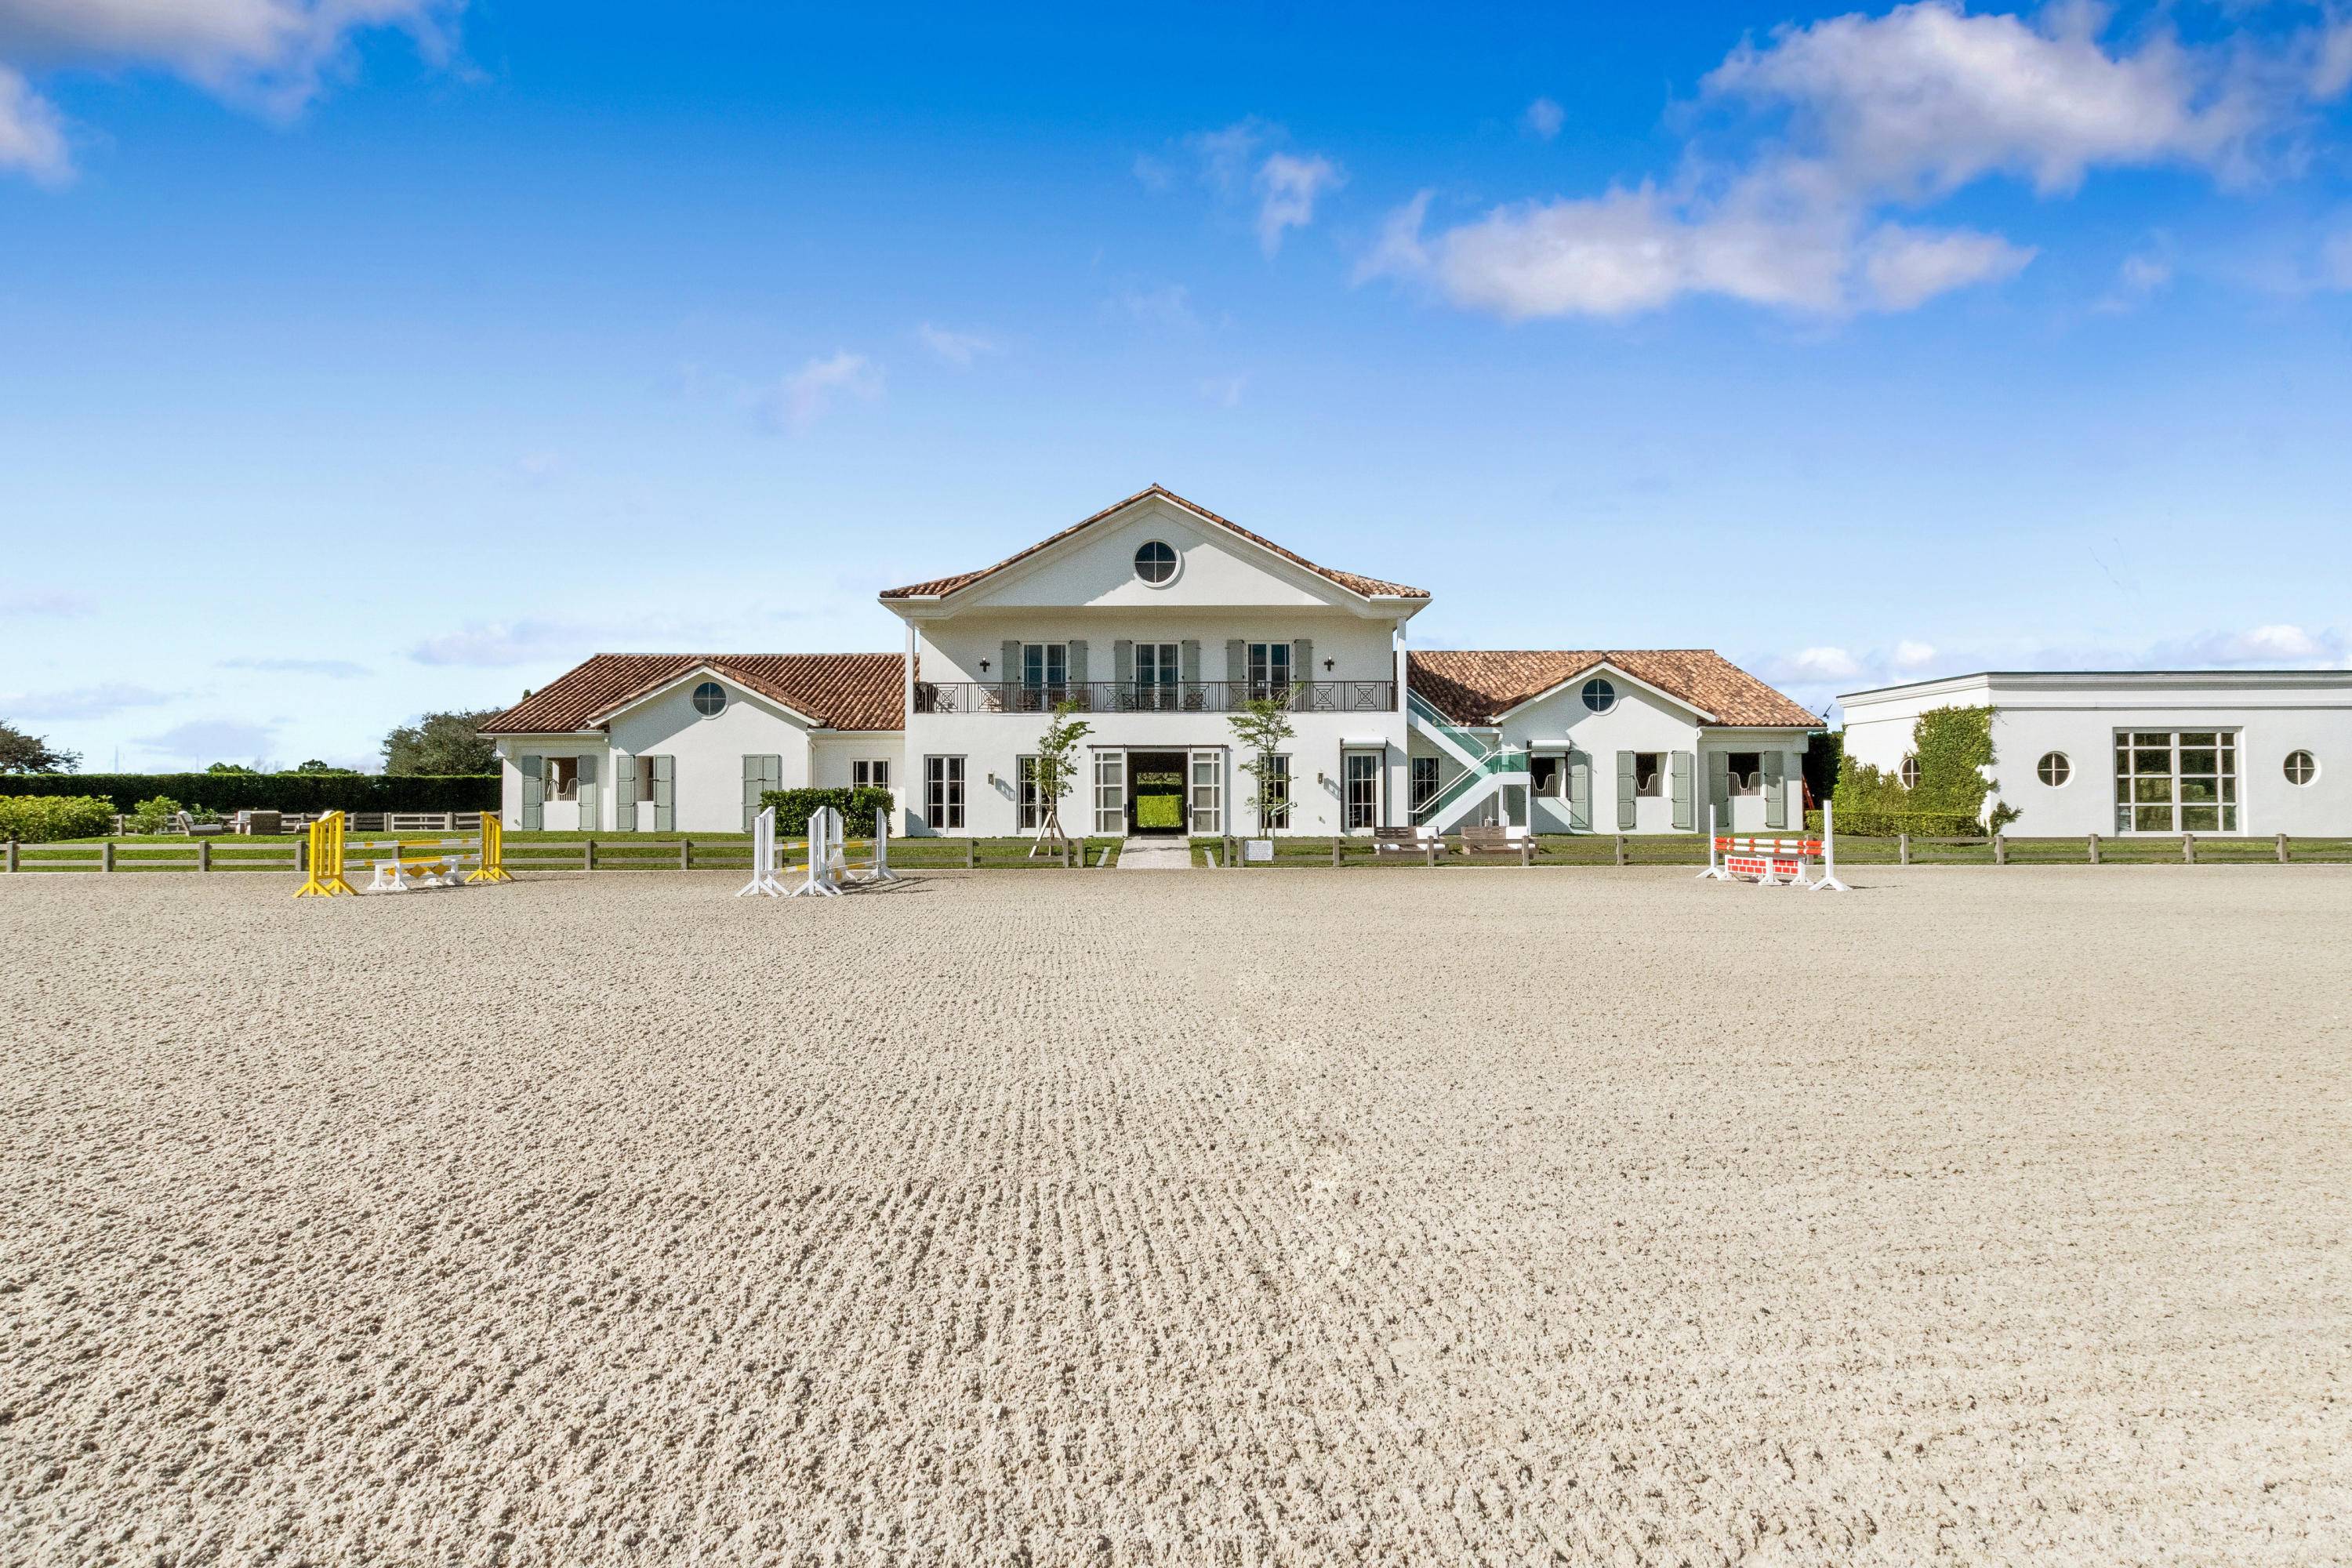 Sunnyland Lane is a beautiful equestrian oasis nestled perfectly on 5.